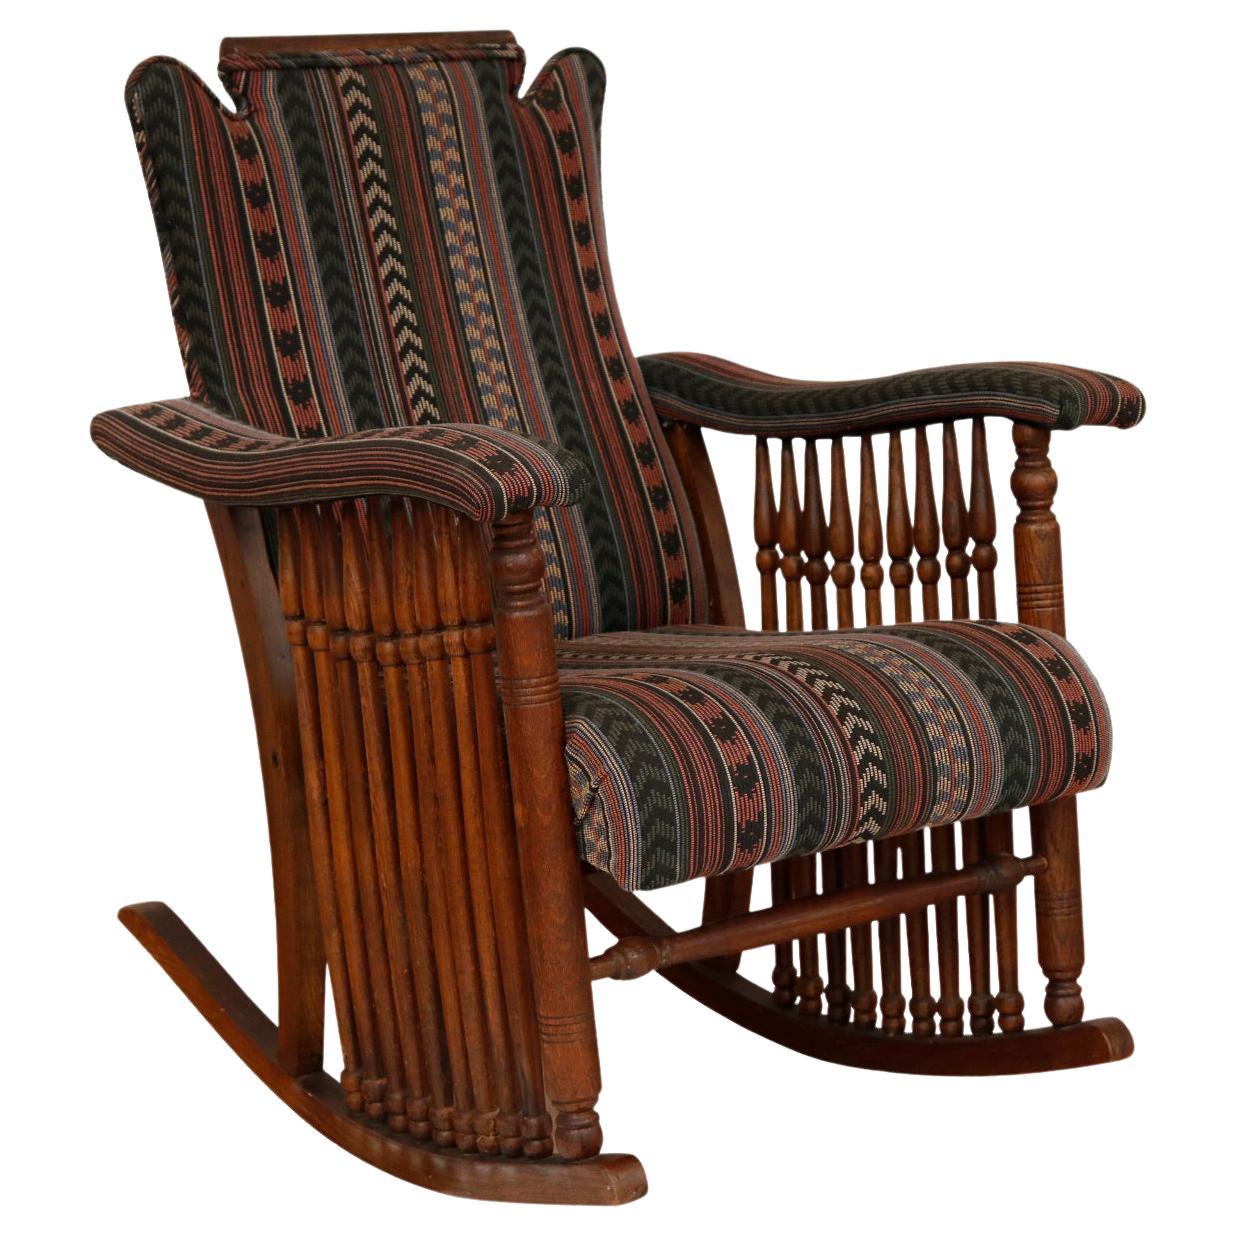 Antique Early American ��“Brewster” Style Rocking Chair